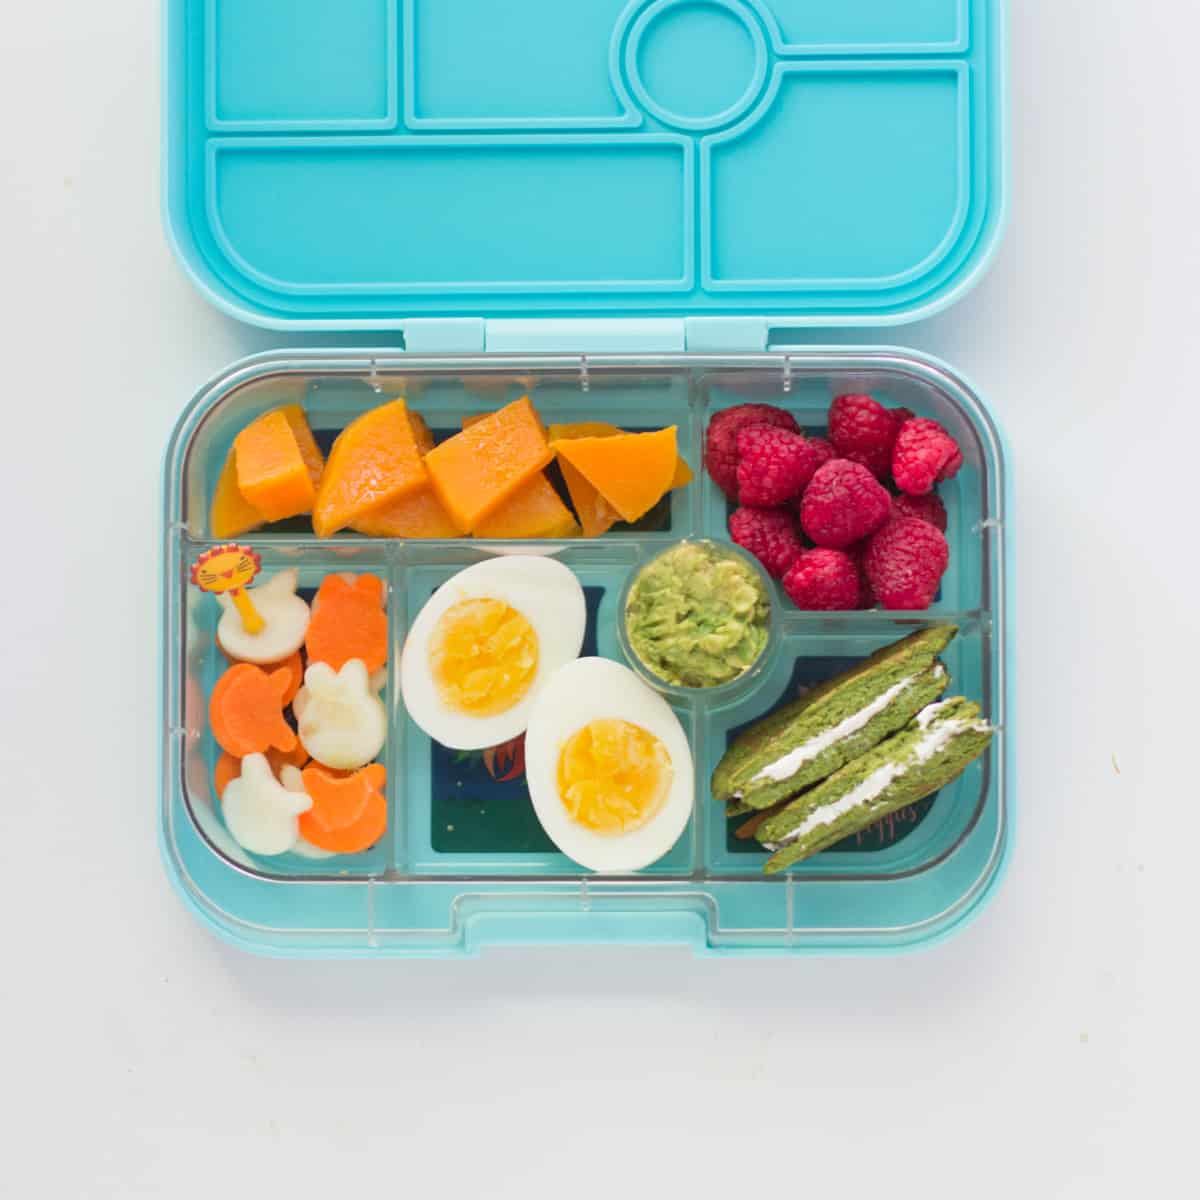 Spinach pancake sandwich with hard boiled egg, raspberries, butternut squash, hummus, and fun shaped zucchini and carrot pieces in a green lunchbox.